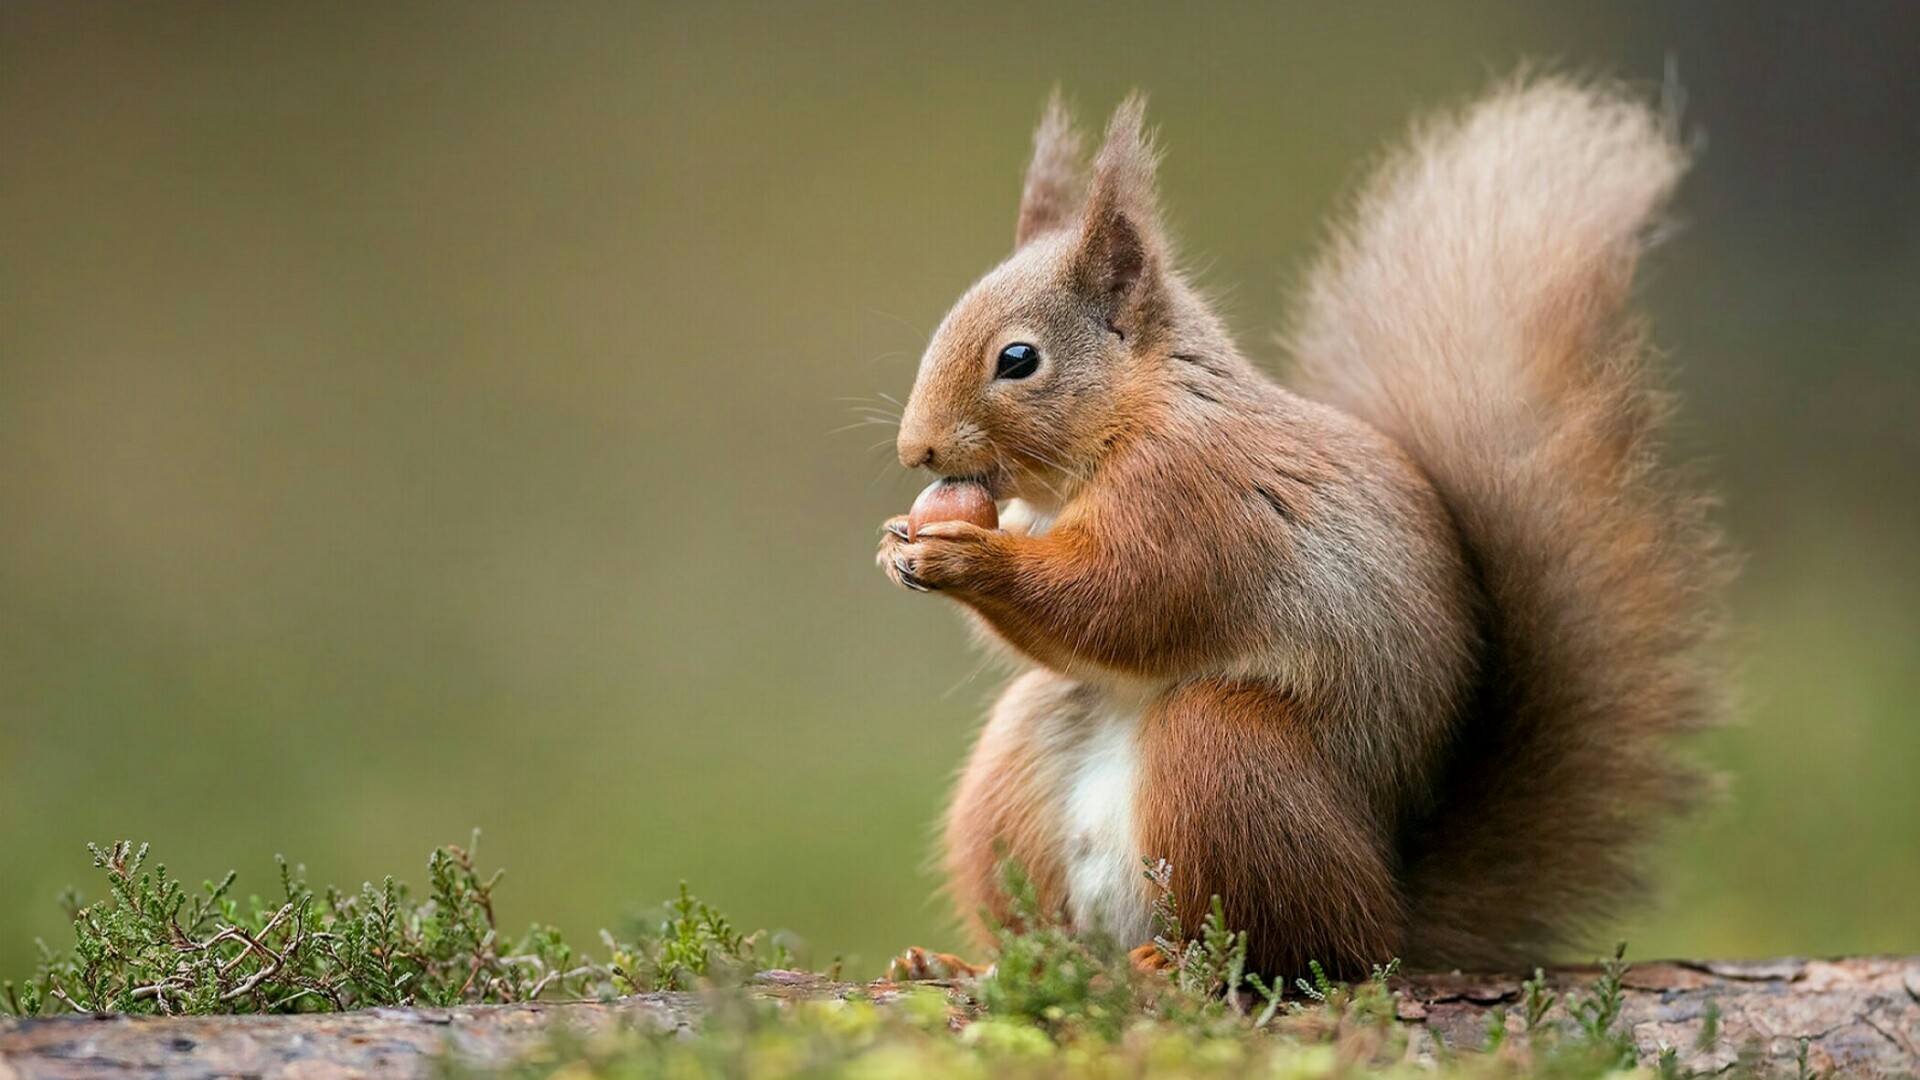 1920x1080 Red squirrel with a nut wallpaper